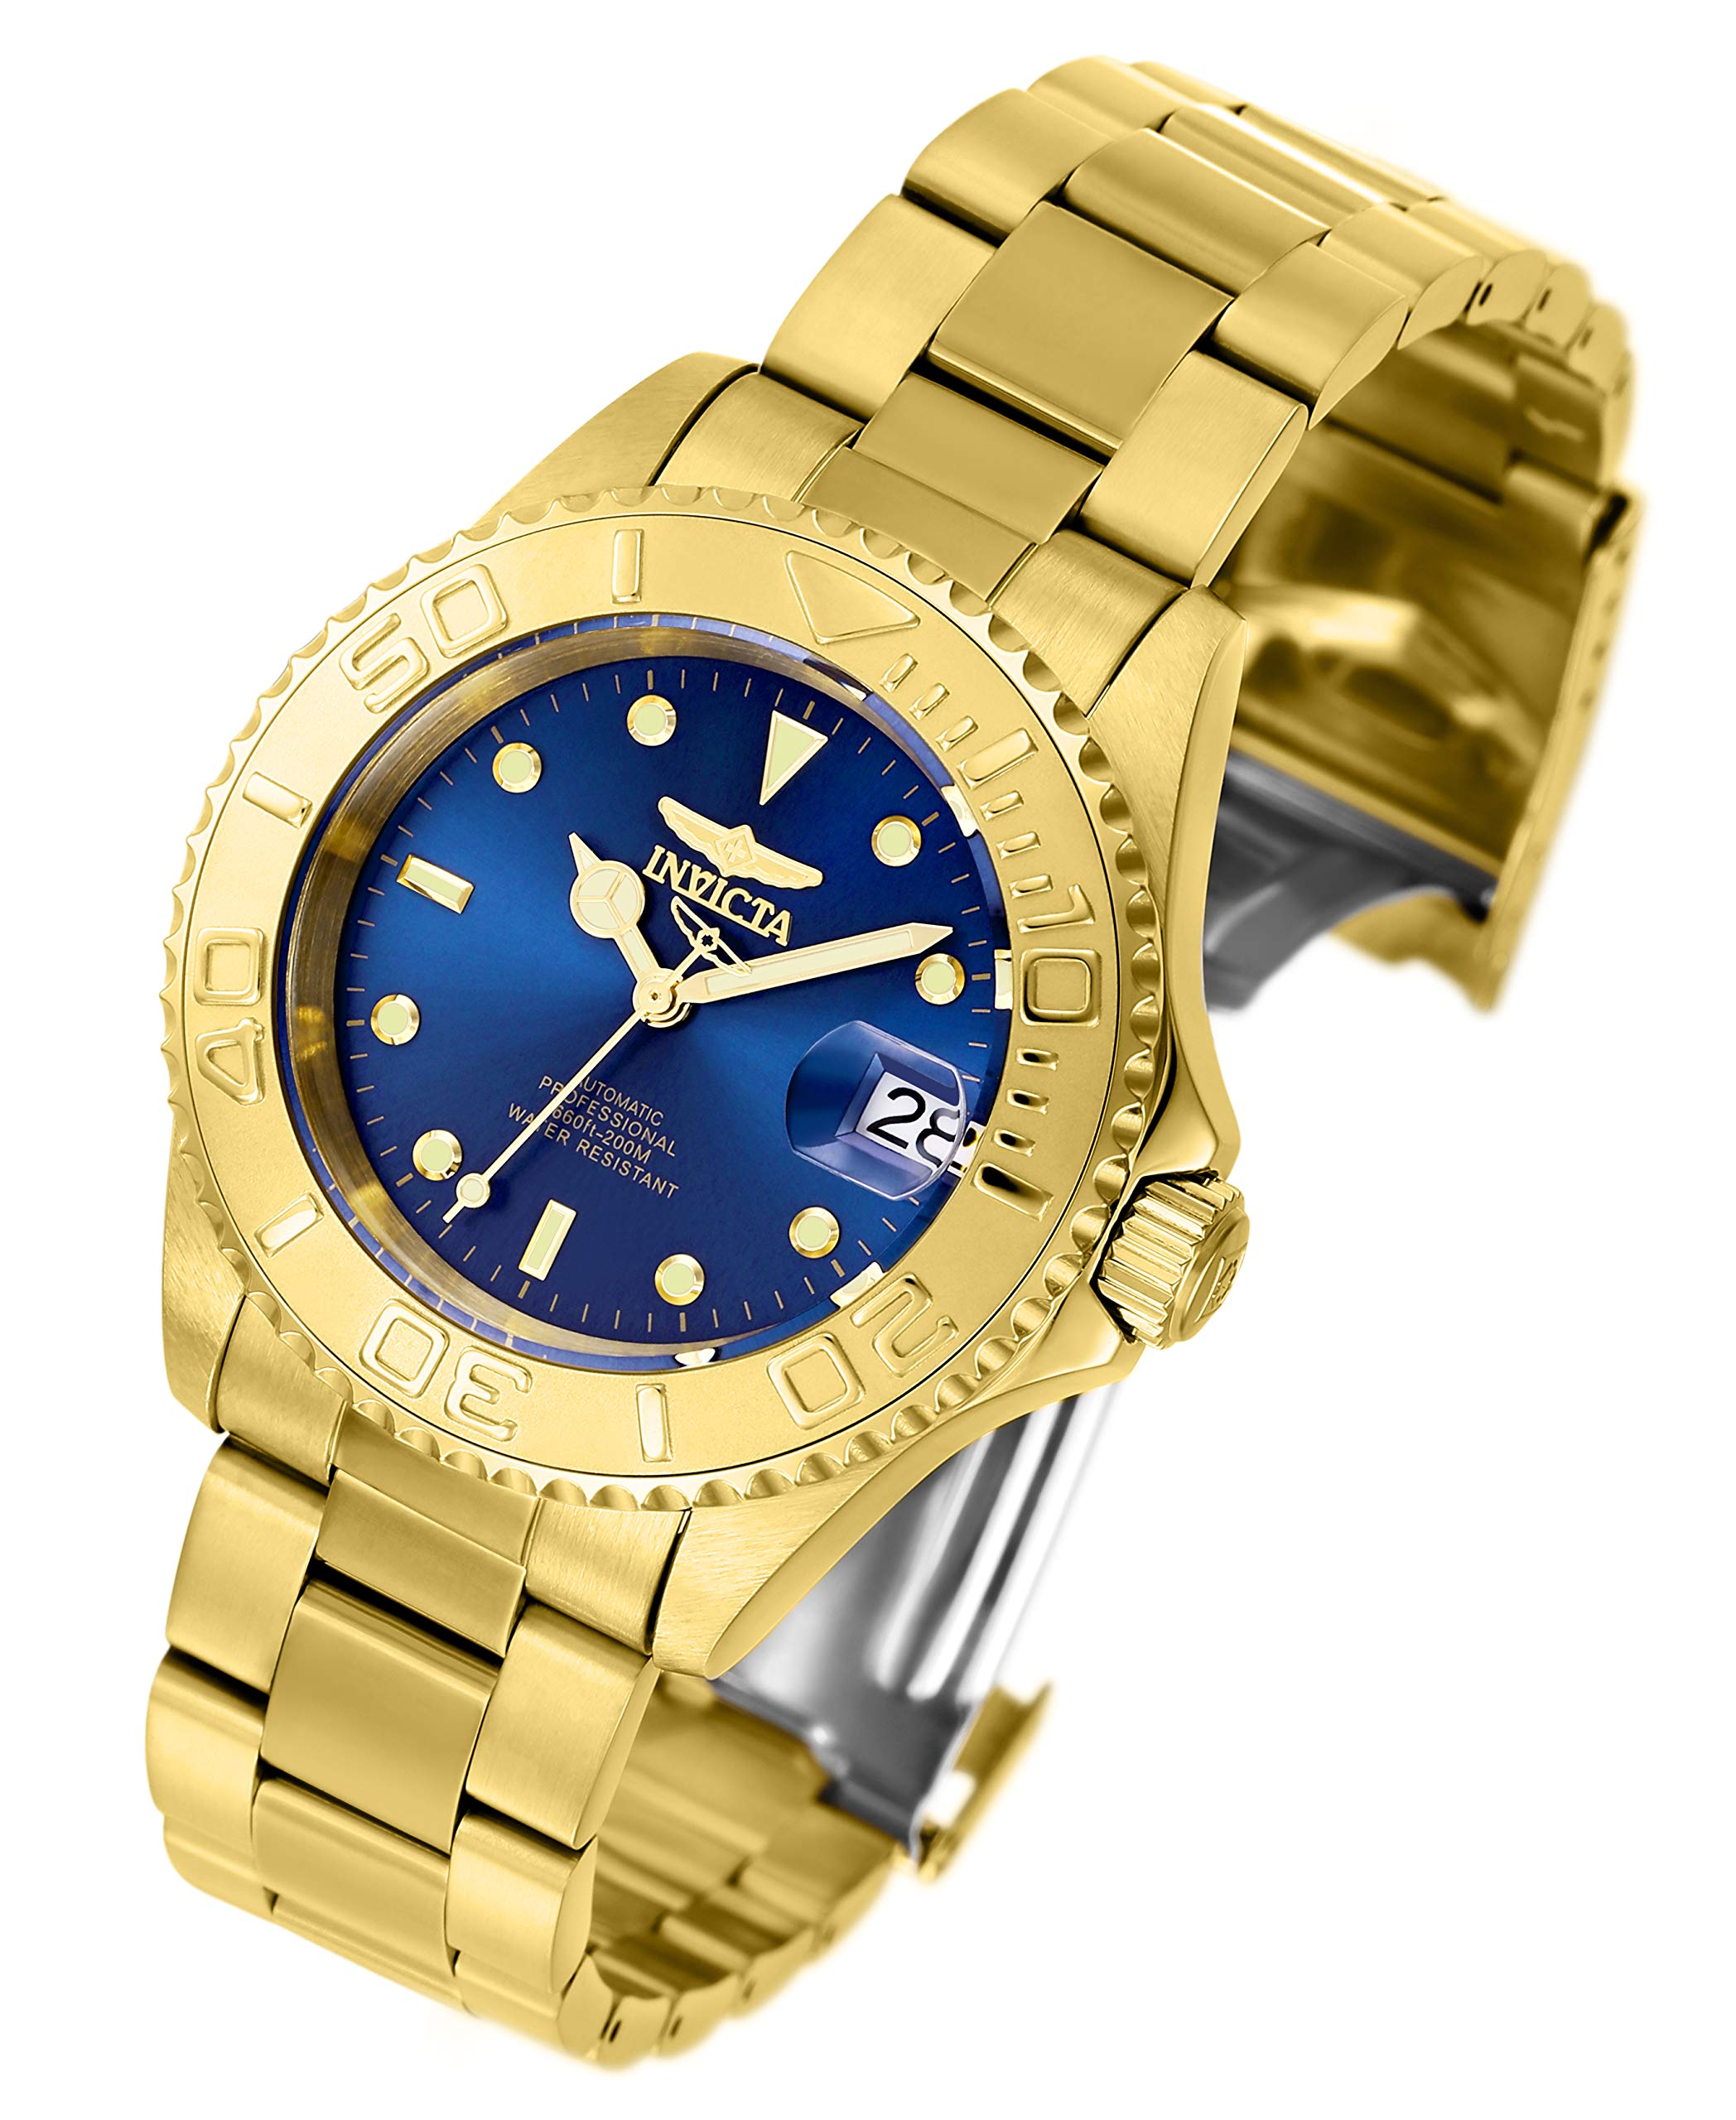 Invicta Men's 26997 Pro Diver Analog Display Automatic Self Wind Gold Watch, Blue